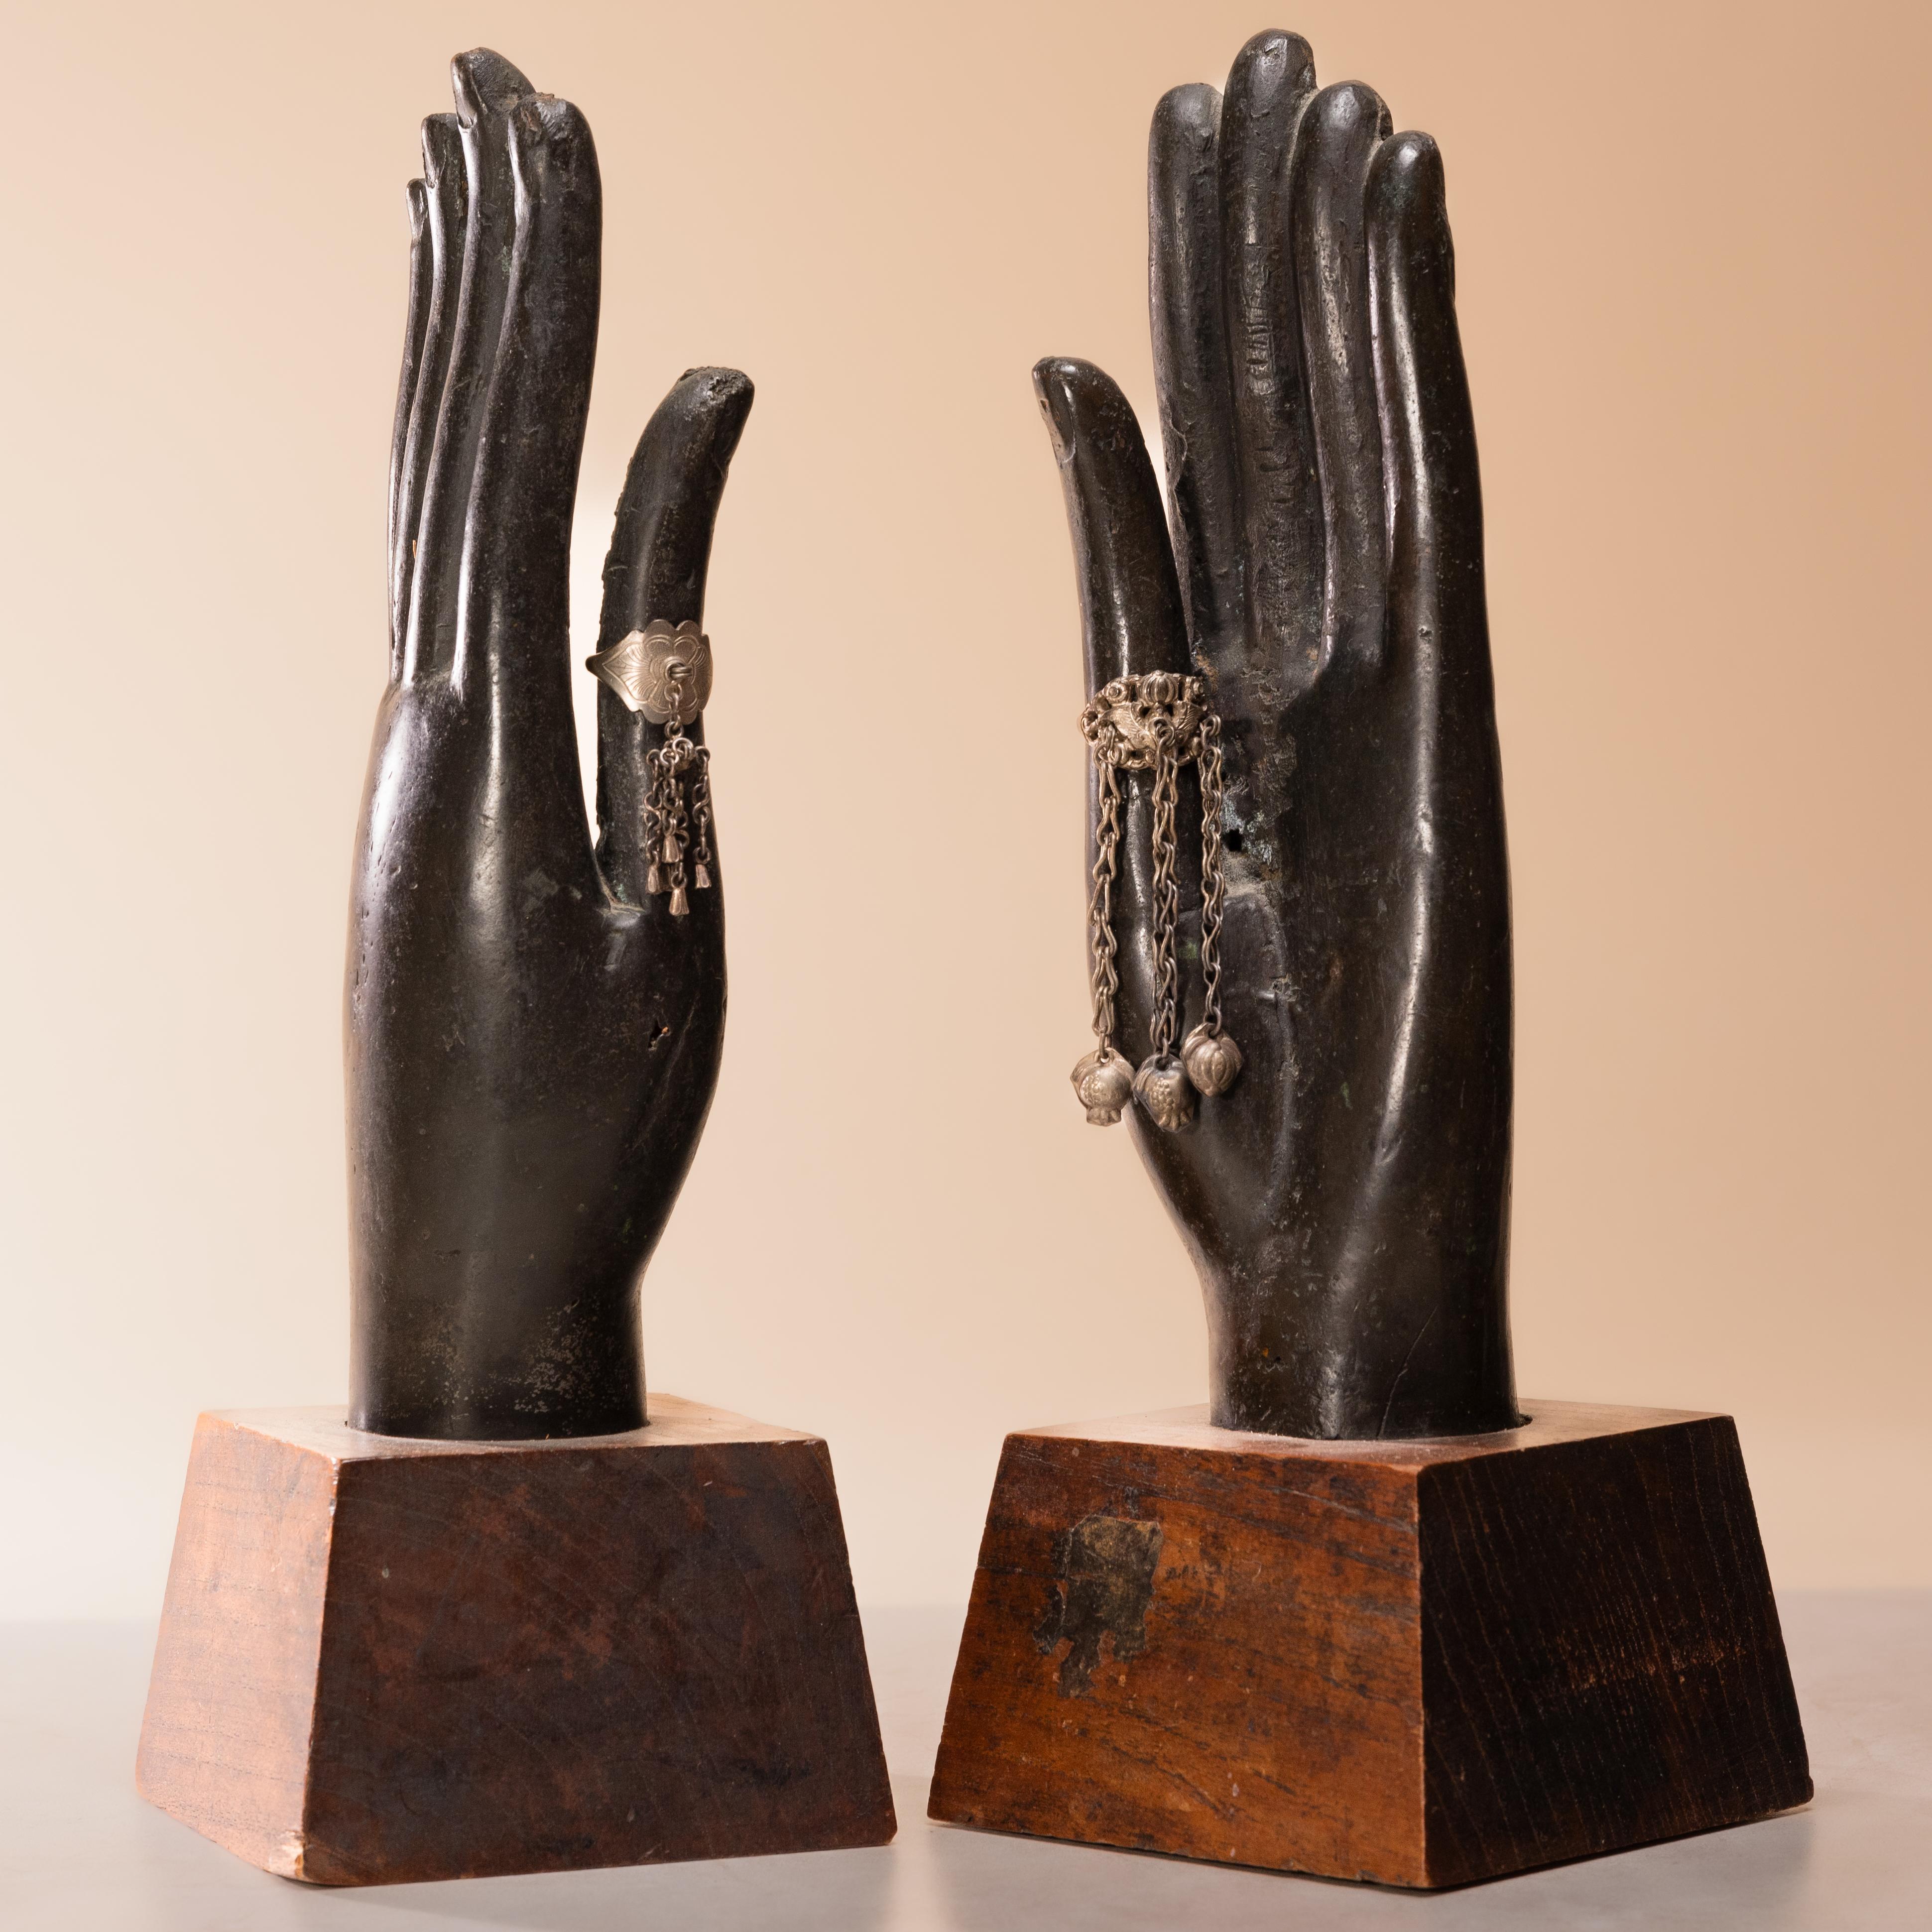 This 19th-century Buddha's hand sculpture from Thailand is finely cast of bronze with lifelike features and a beautiful dark patina. The hand is held upwards in abhaya mudra, the gesture of protection and reassurance. With arms outstretched and